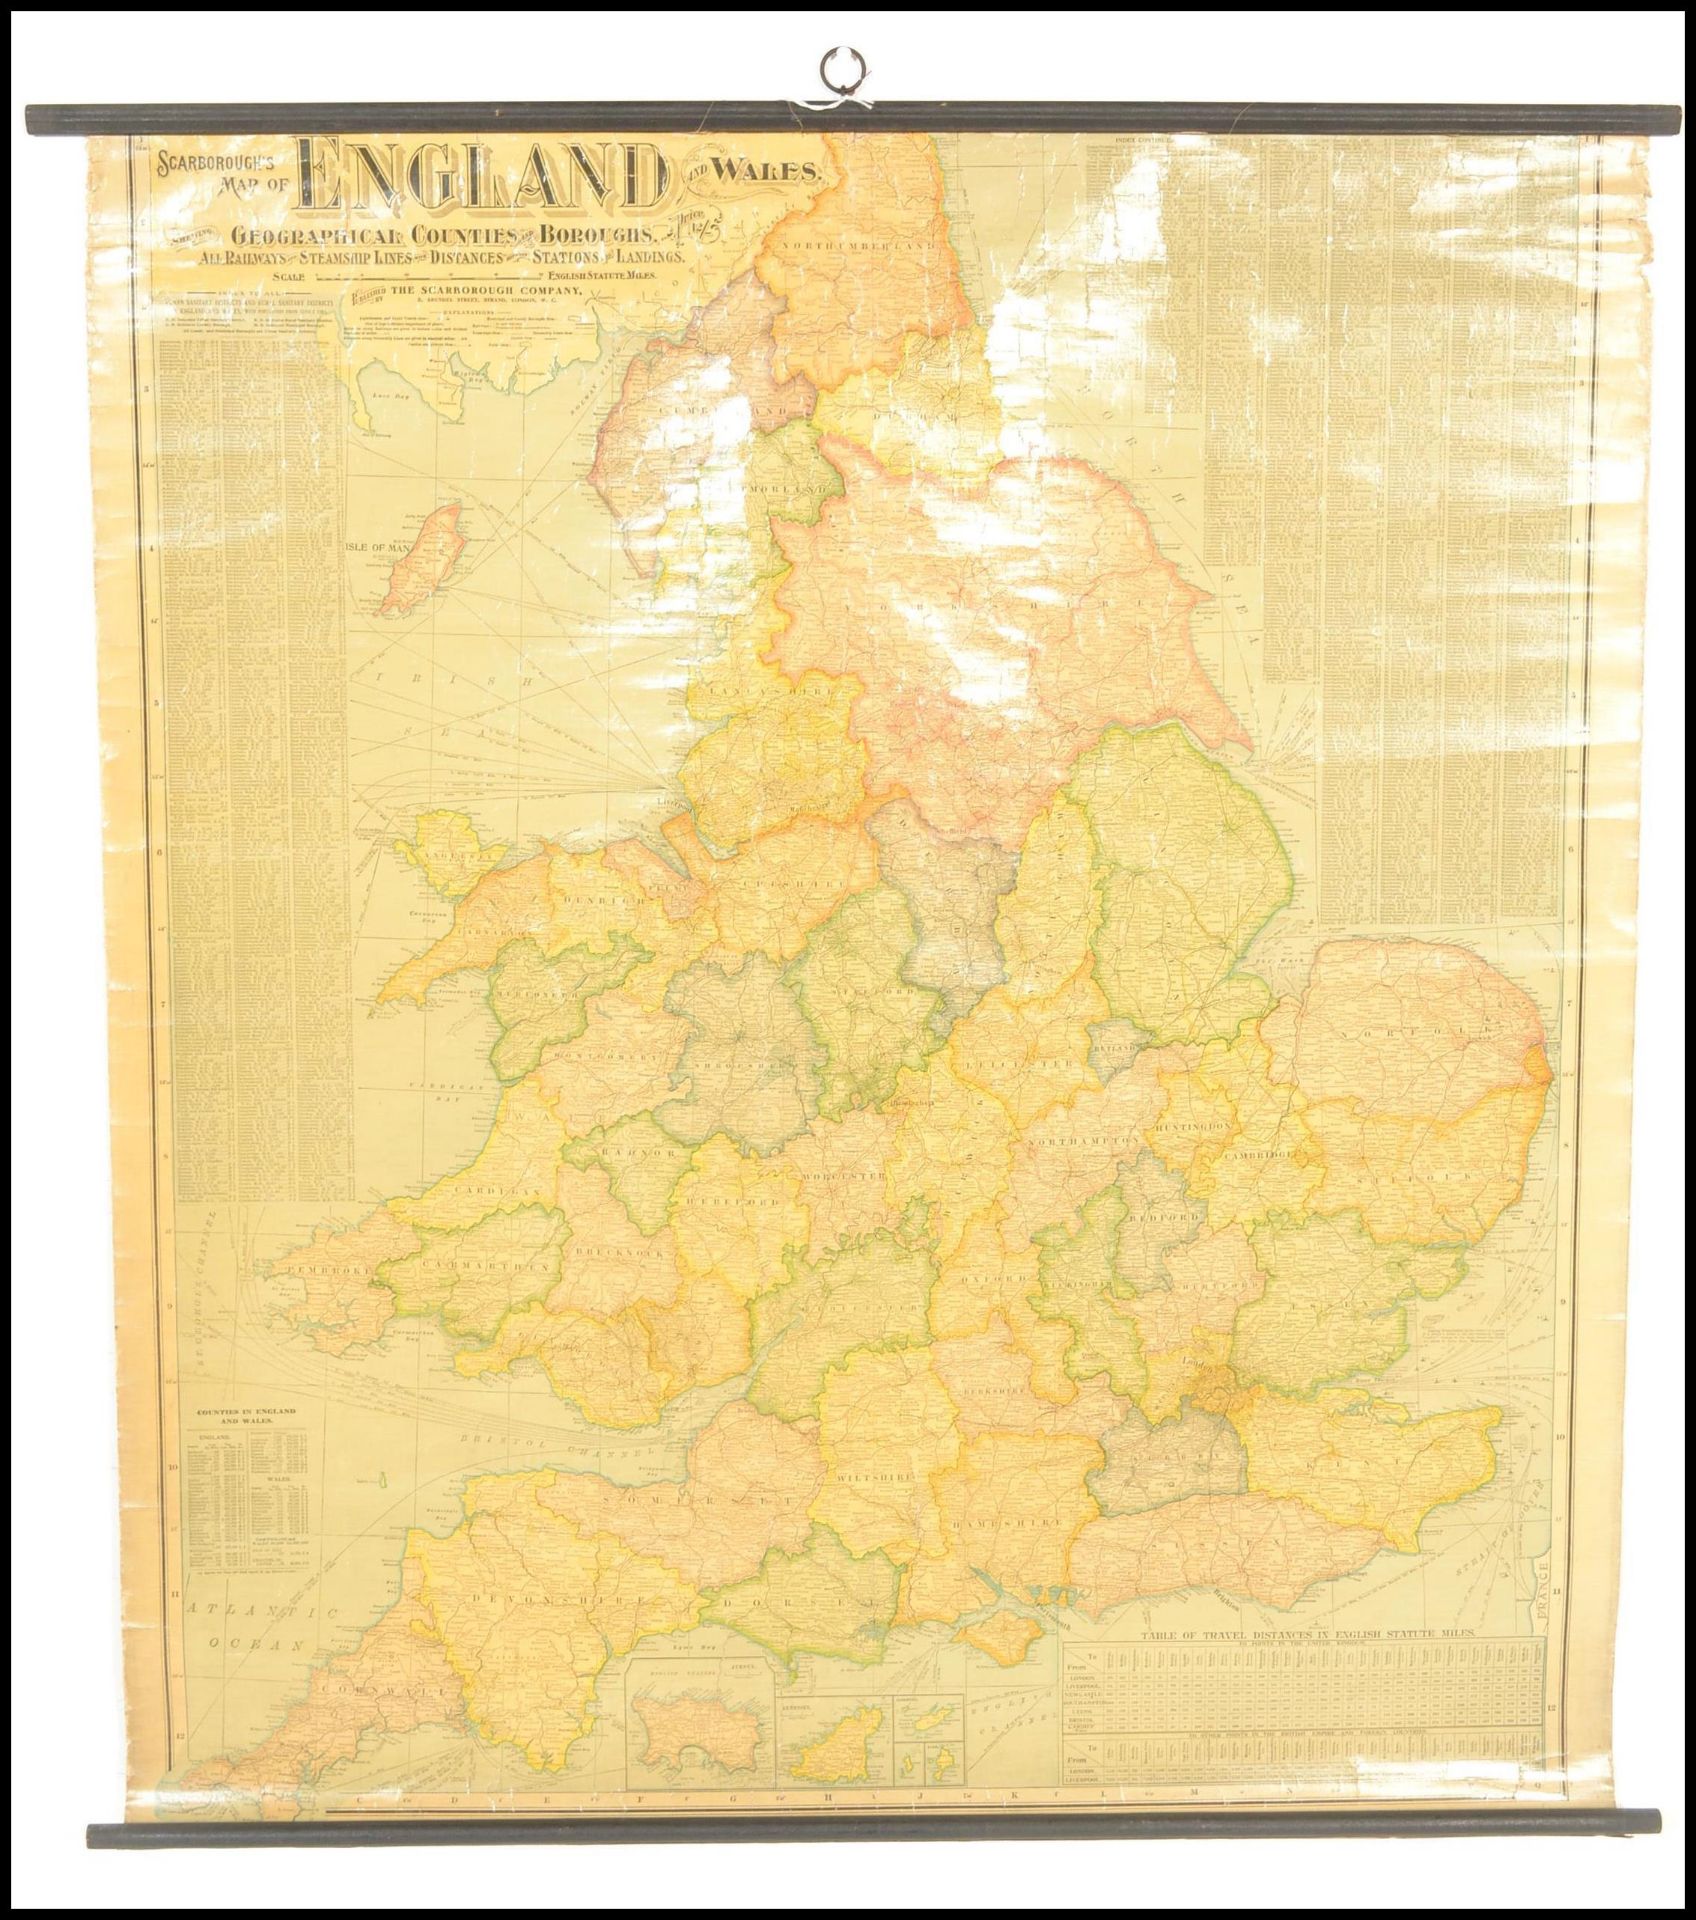 A Vintage Scarborough map of England and wales showing Geographical Counties and Boroughs, all